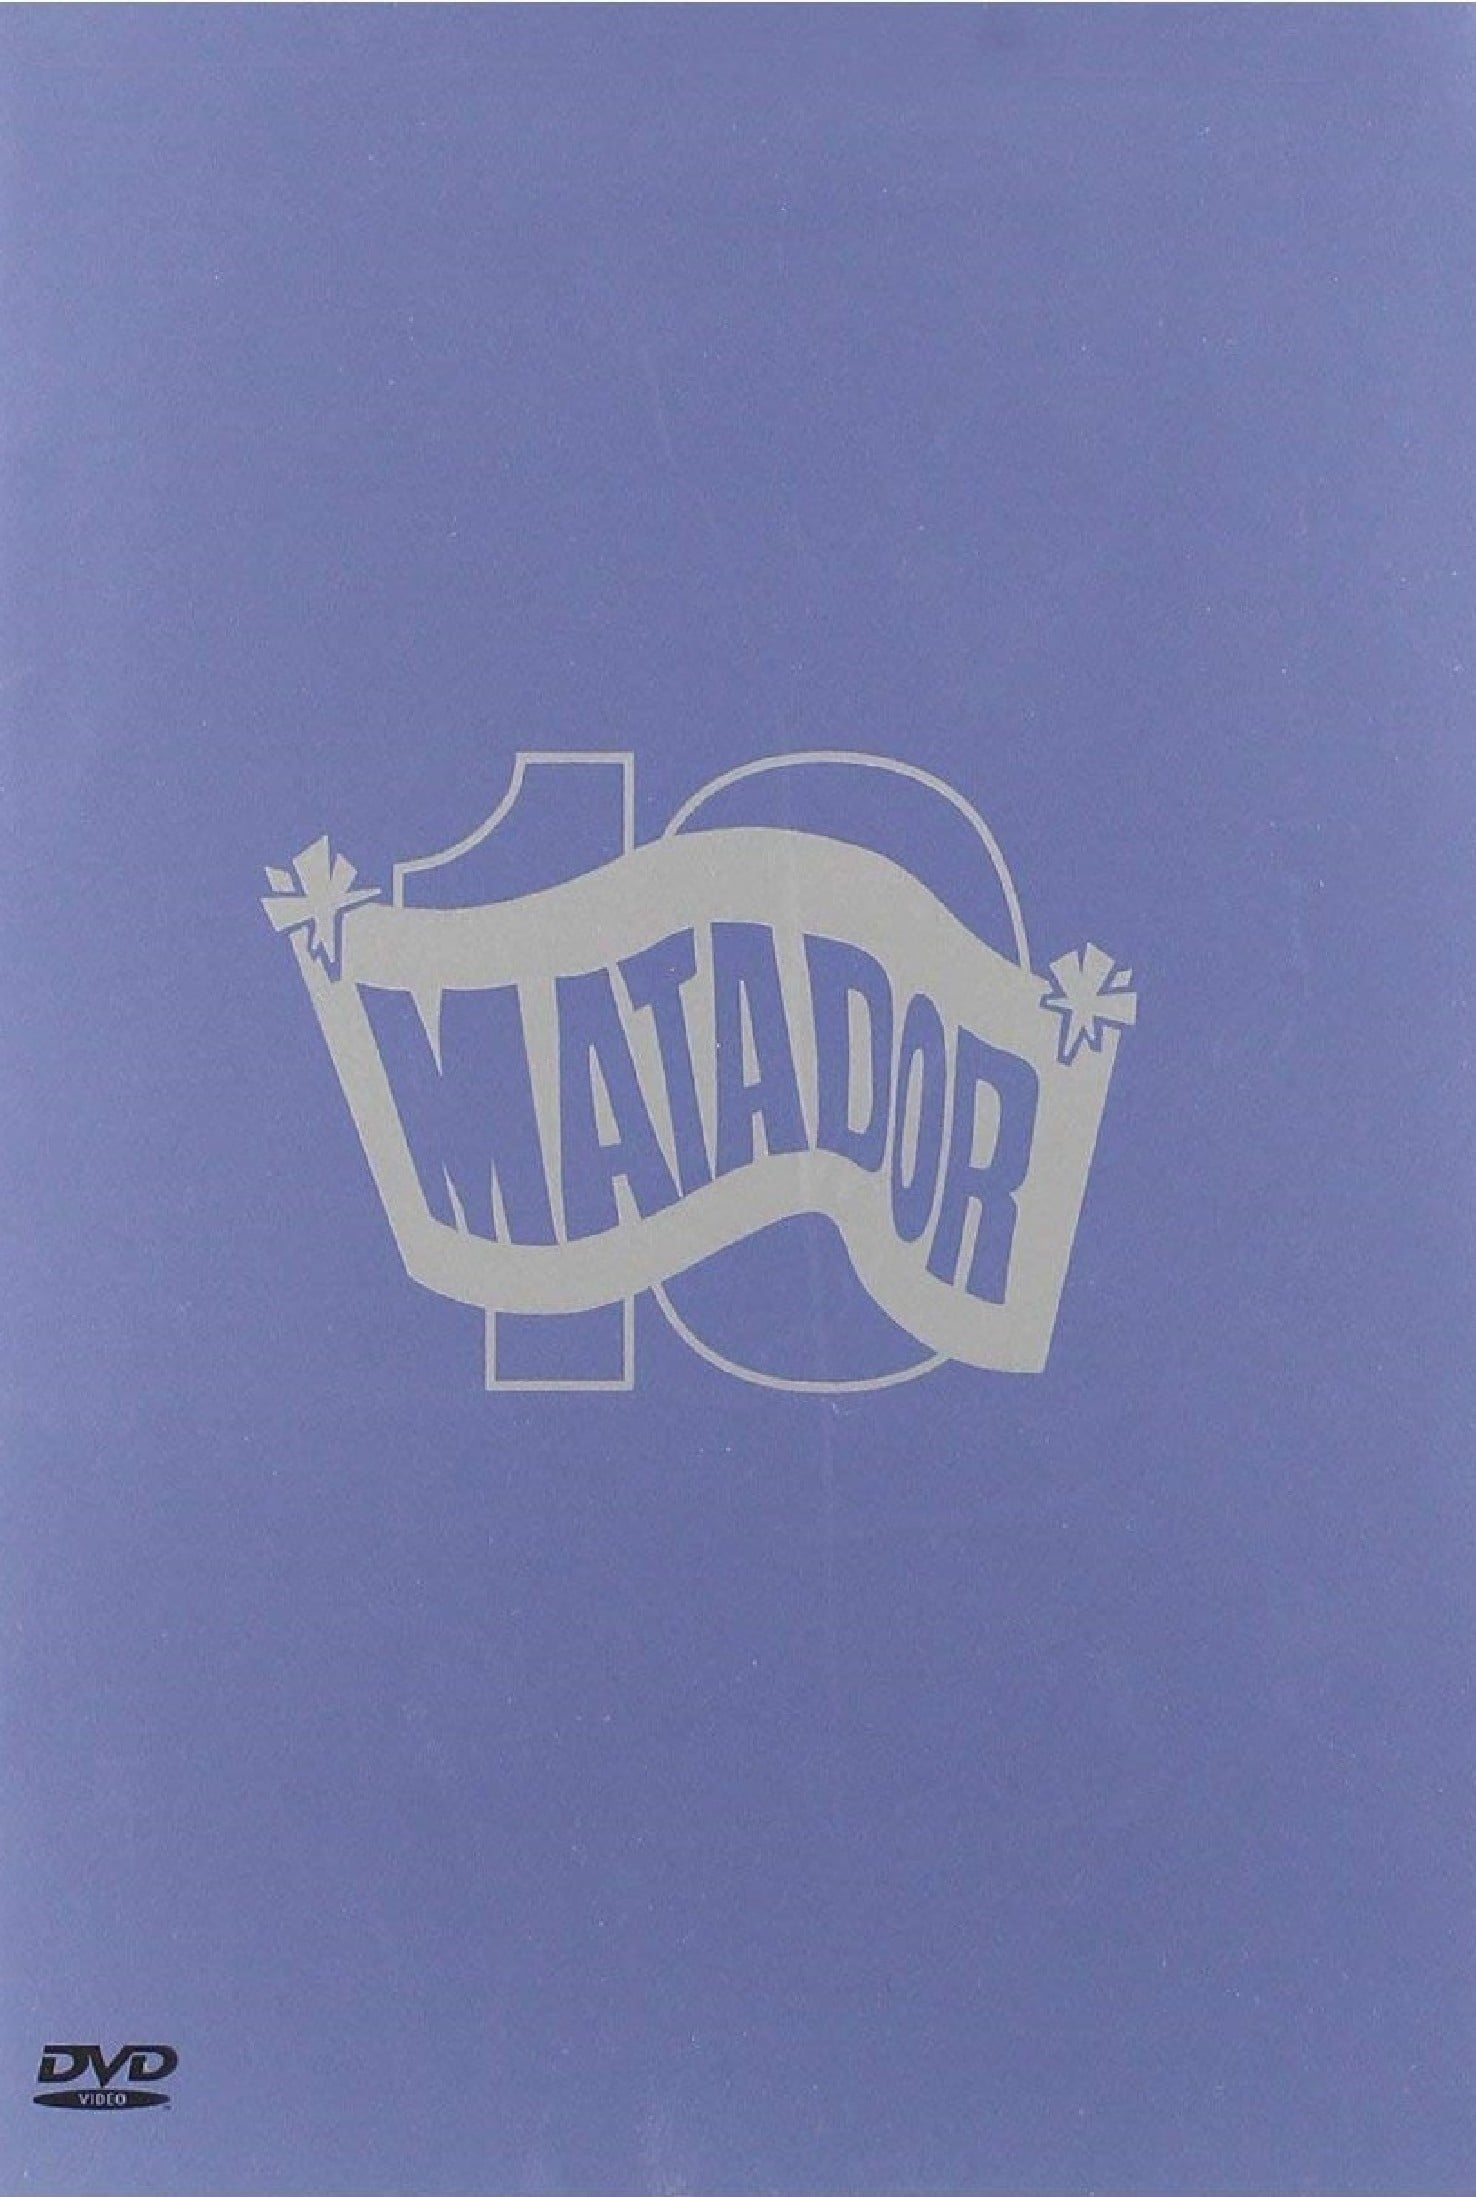 Everything Is Nice: The Matador Records 10th Anniversary Anthology